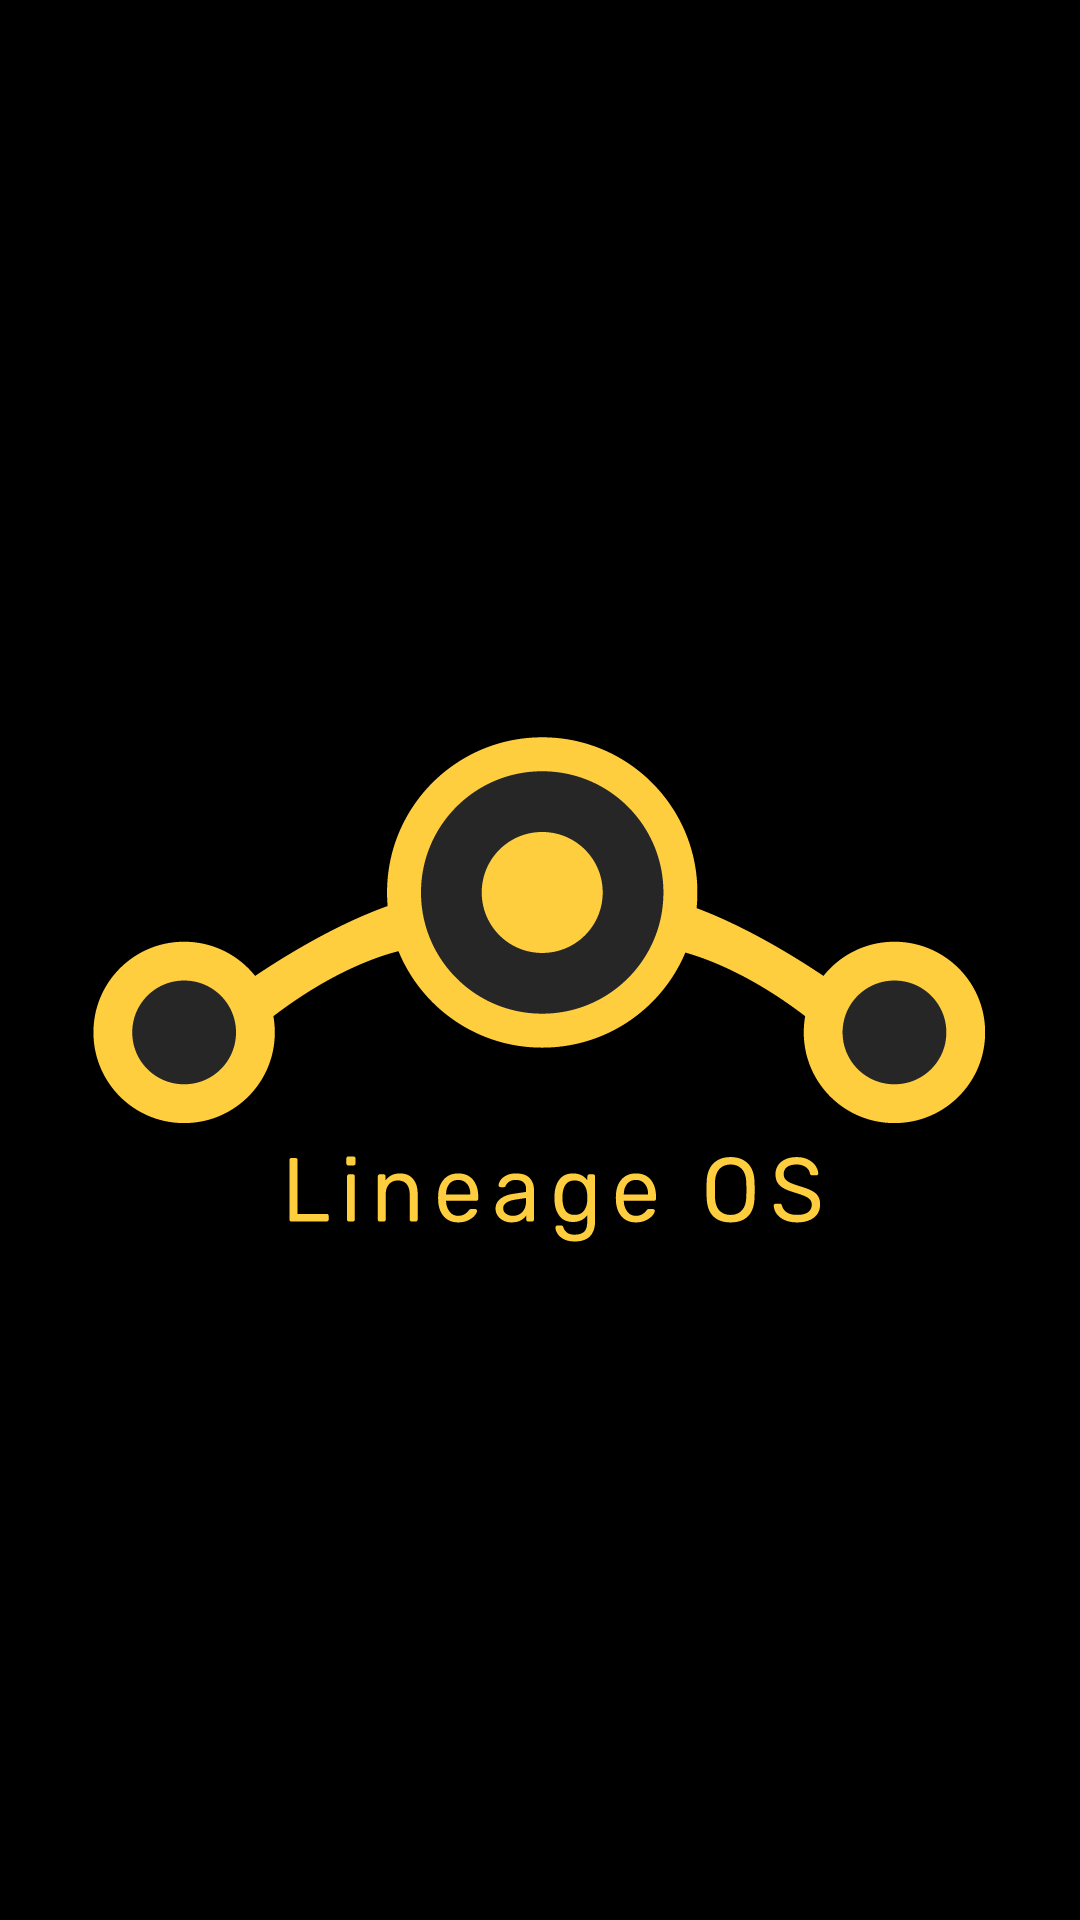 Lineage OS Android Operating System Simple Background Minimalism 1080x1920